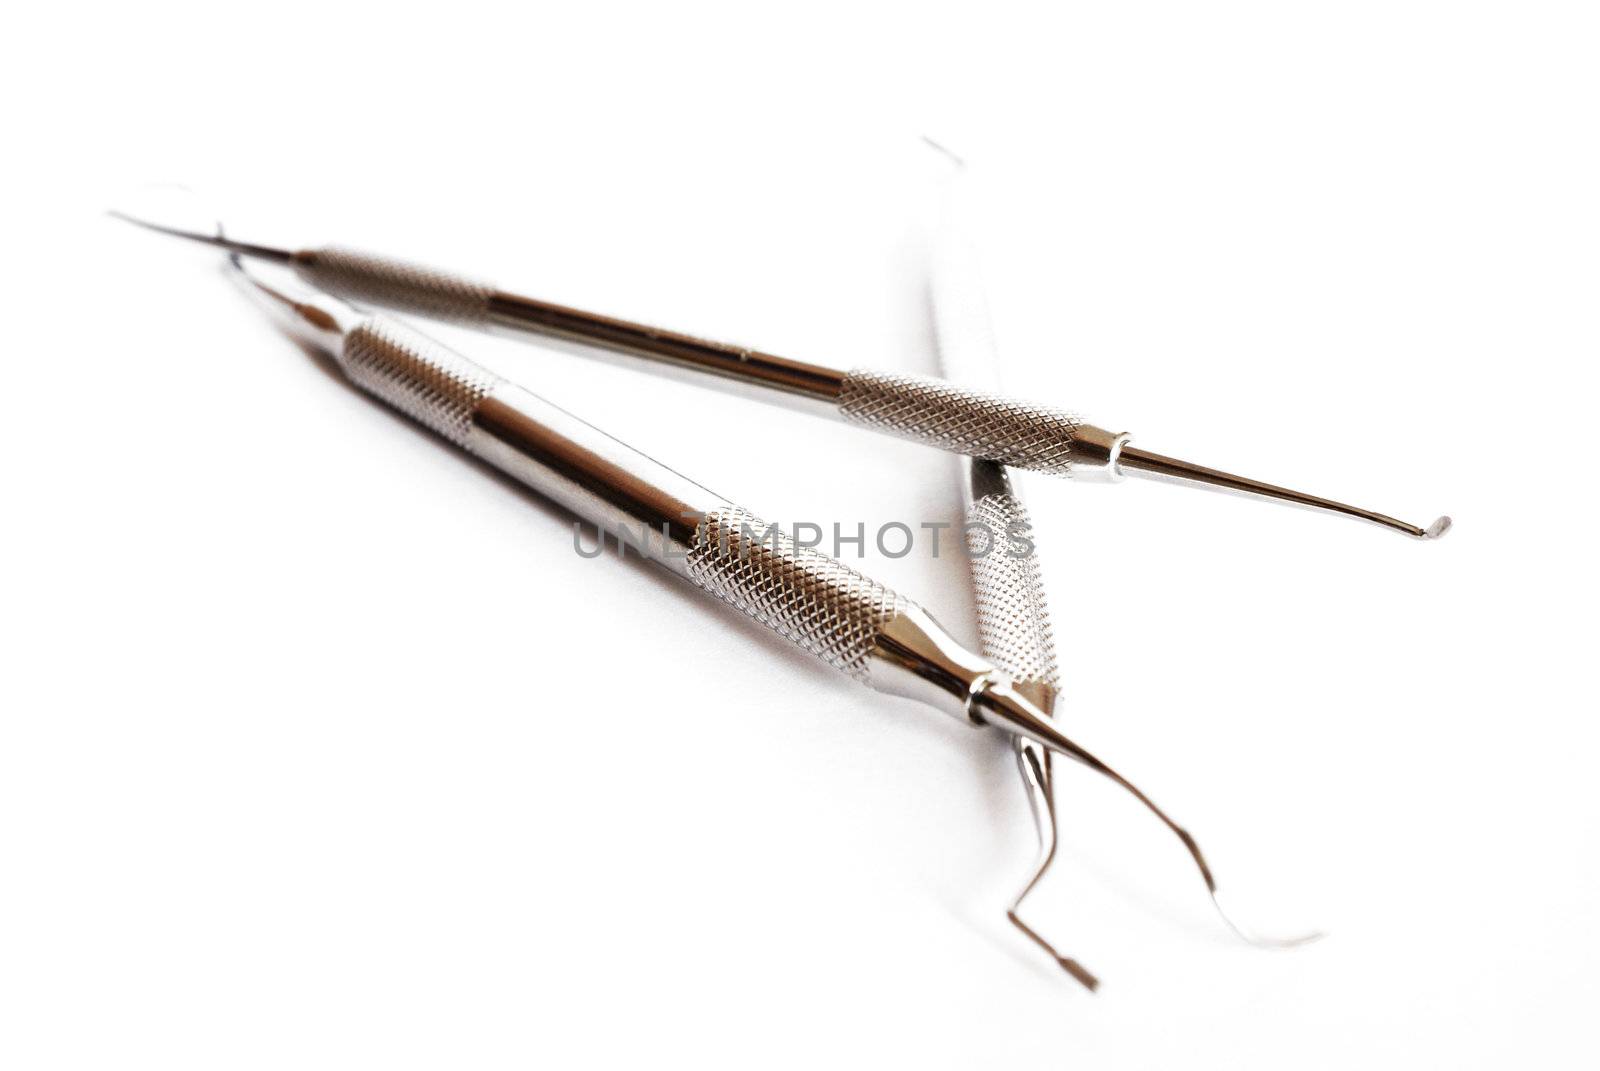 three dentist tools isolated against white baground